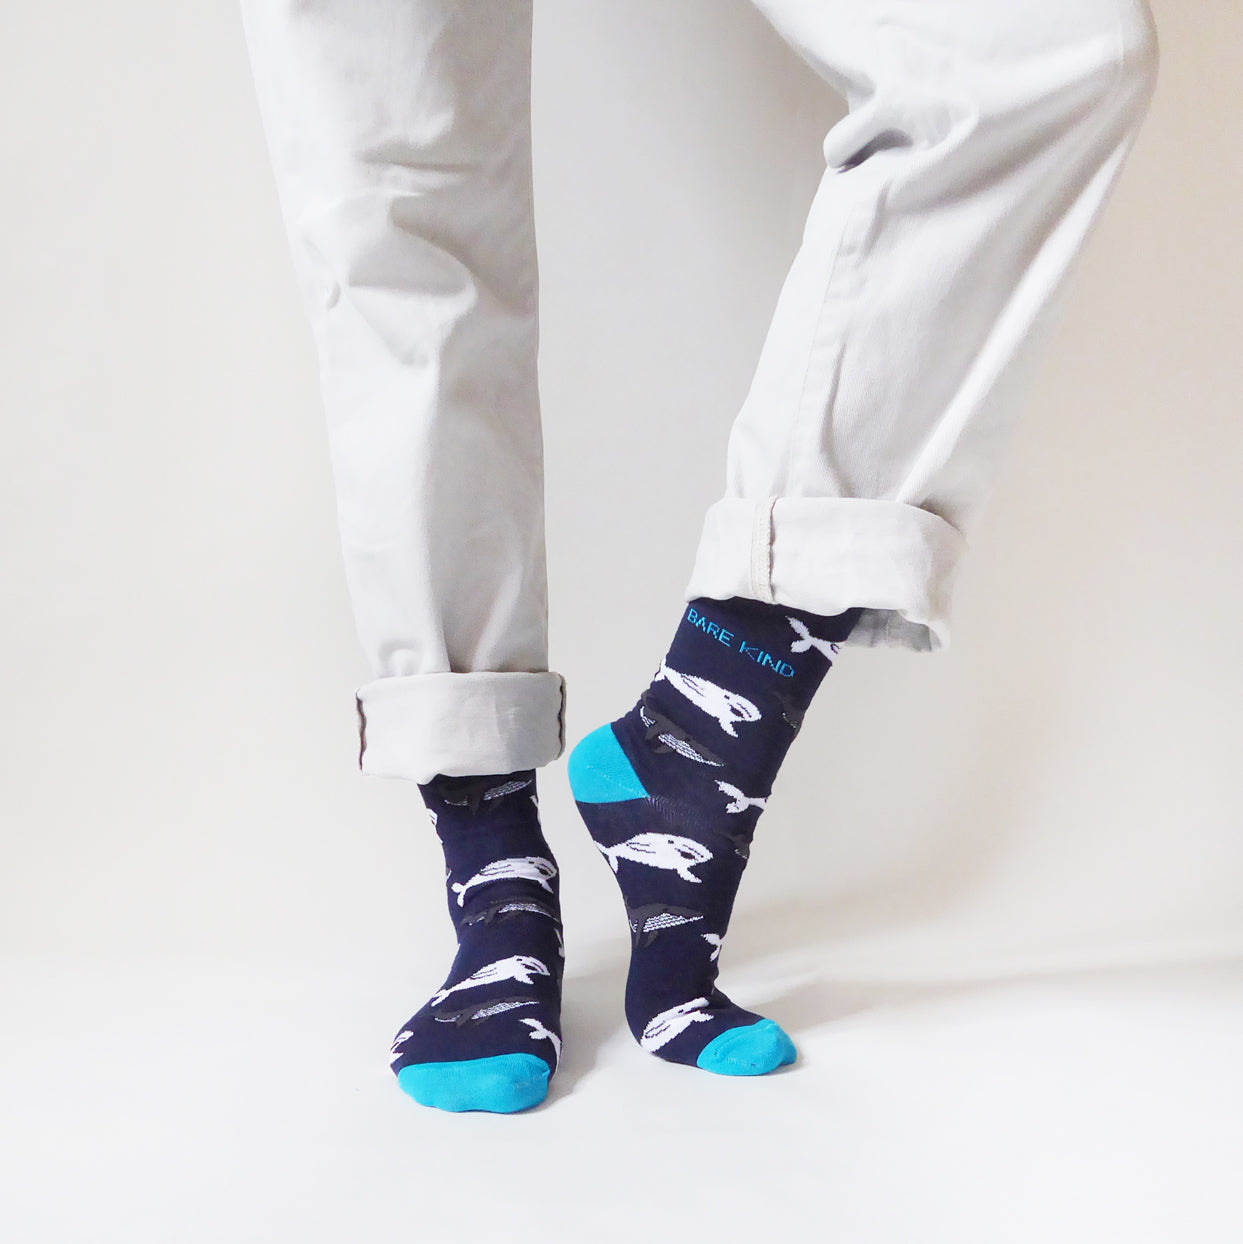 Bare Kind Bamboo Socks - Save the Whales